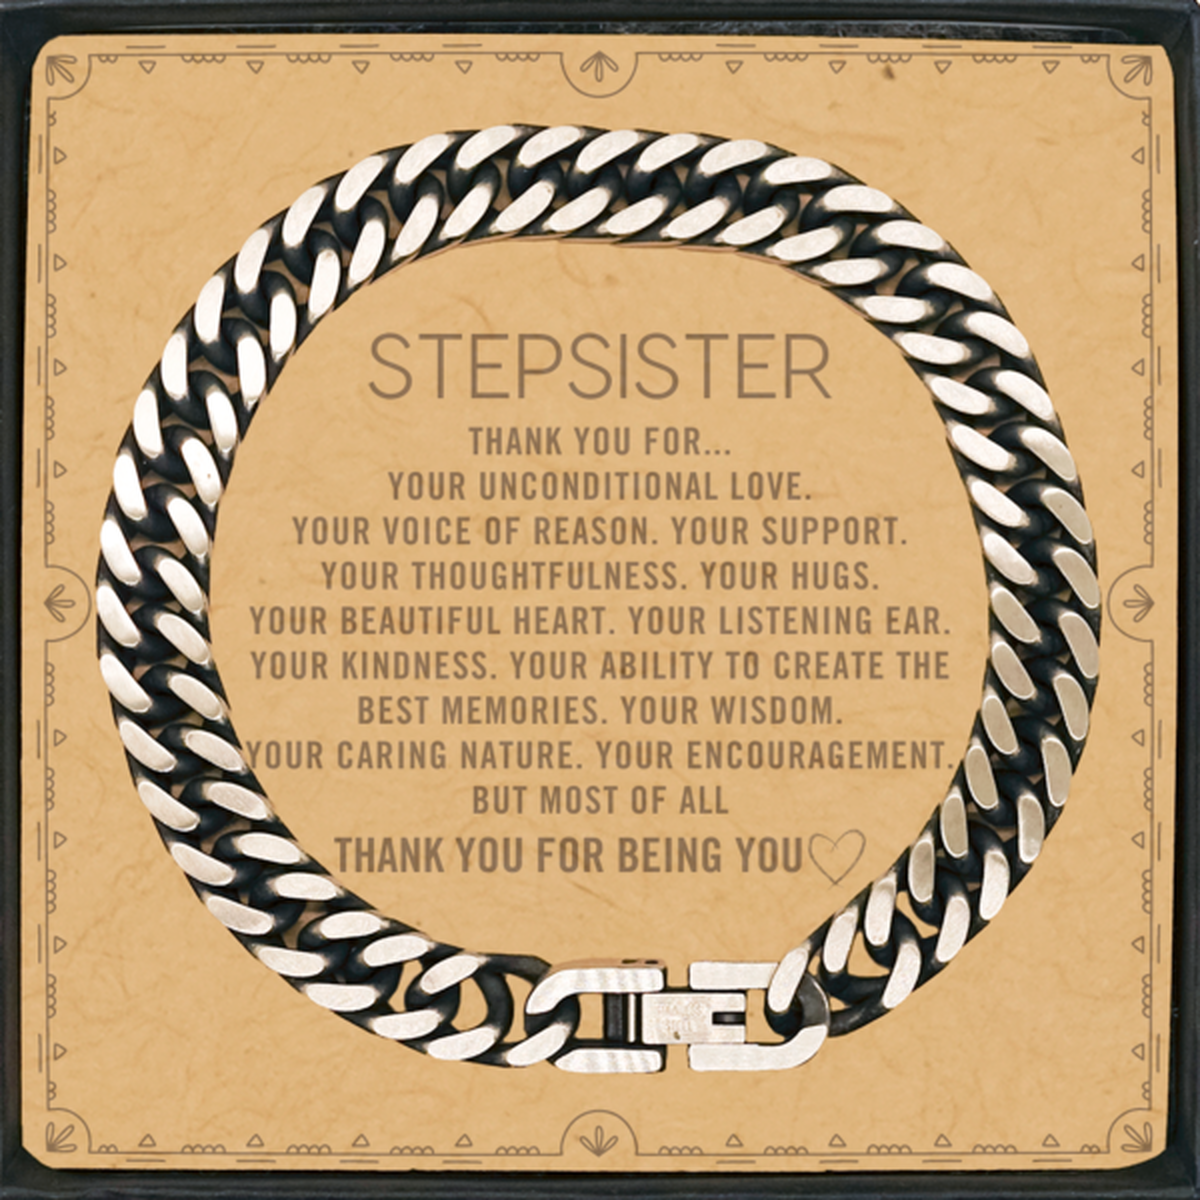 Stepsister Cuban Link Chain Bracelet Custom, Message Card Gifts For Stepsister Christmas Graduation Birthday Gifts for Men Women Stepsister Thank you for Your unconditional love